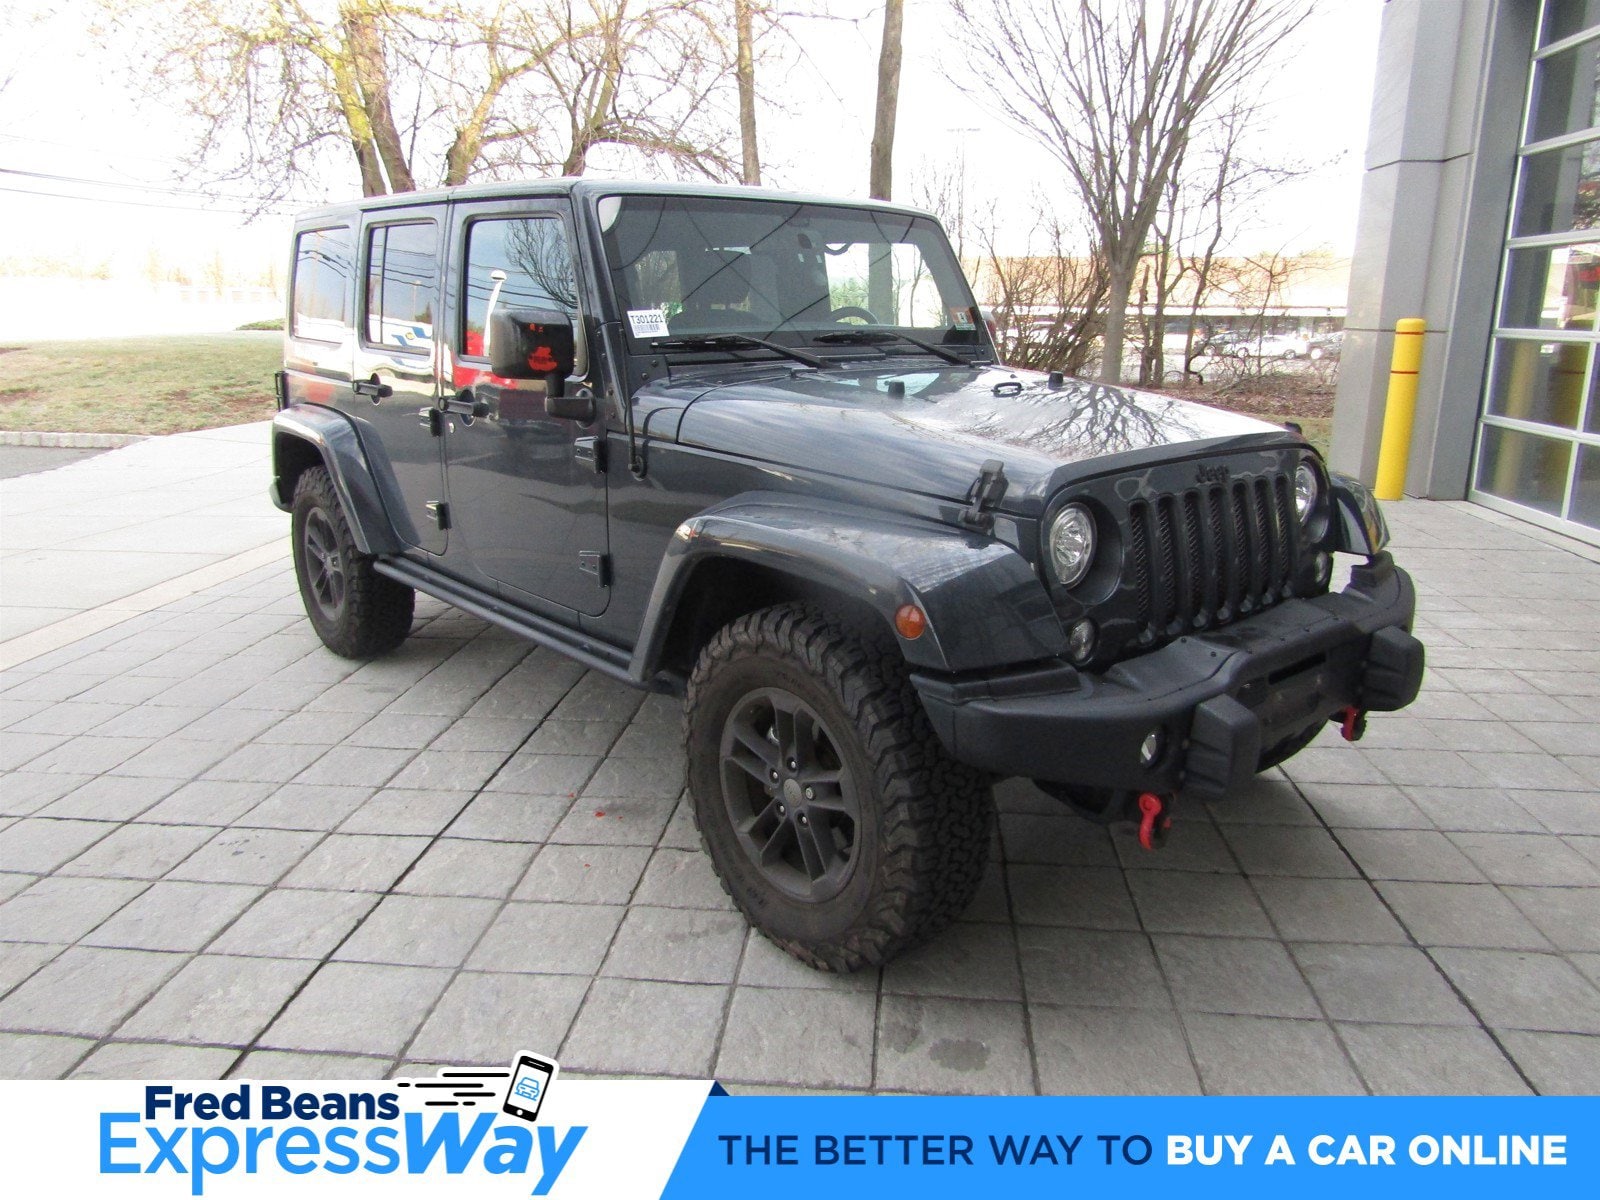 Used 2017 Jeep Wrangler JK Unlimited For Sale at Fred Beans Lincoln | VIN:  1C4HJWEGXHL616064